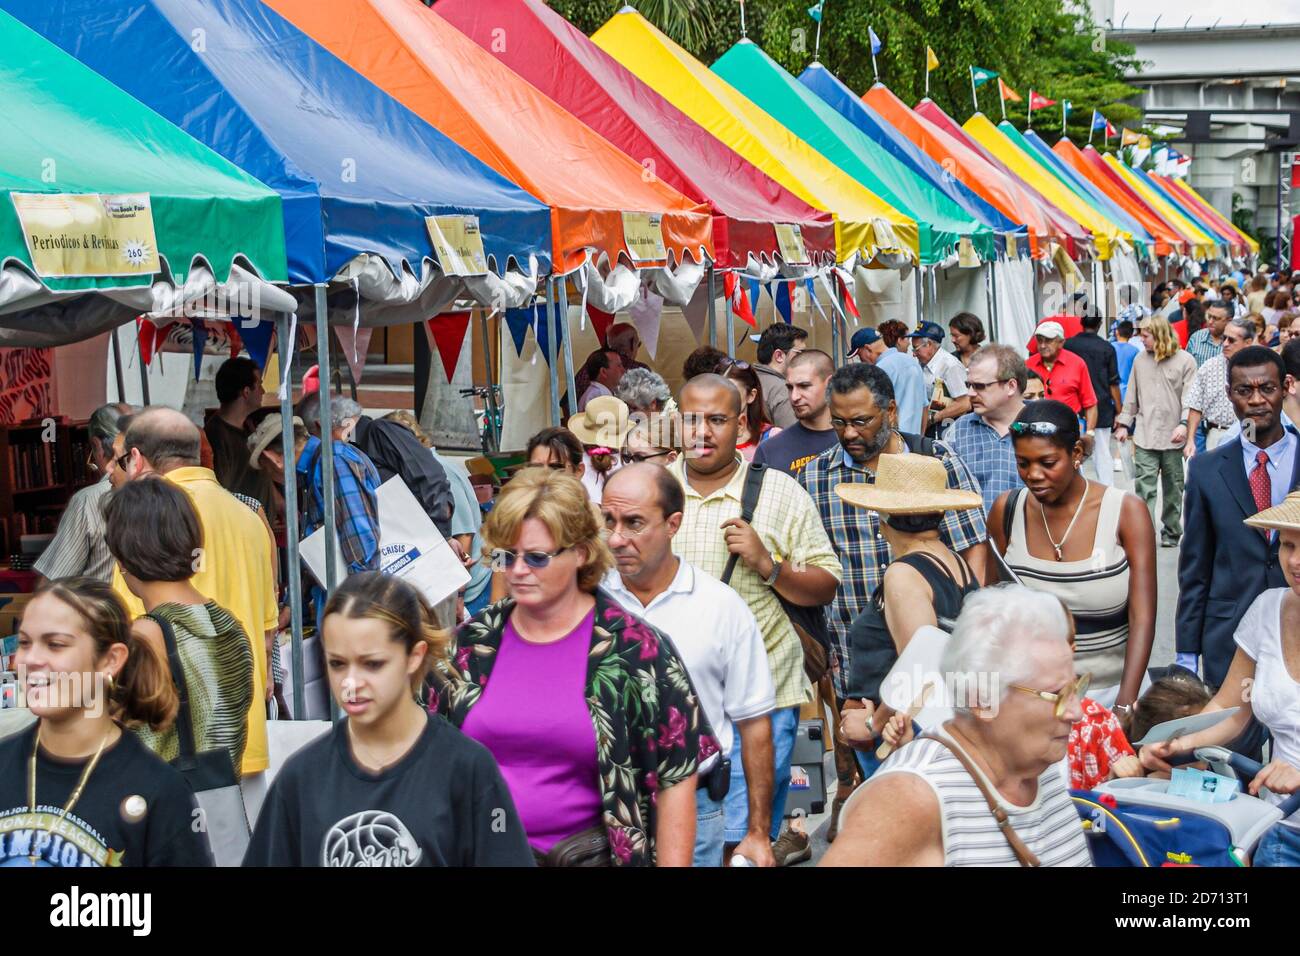 Miami Florida,International Book Fair festival,annual event vendors sellers stalls booths tents crowd people,colorful, Stock Photo